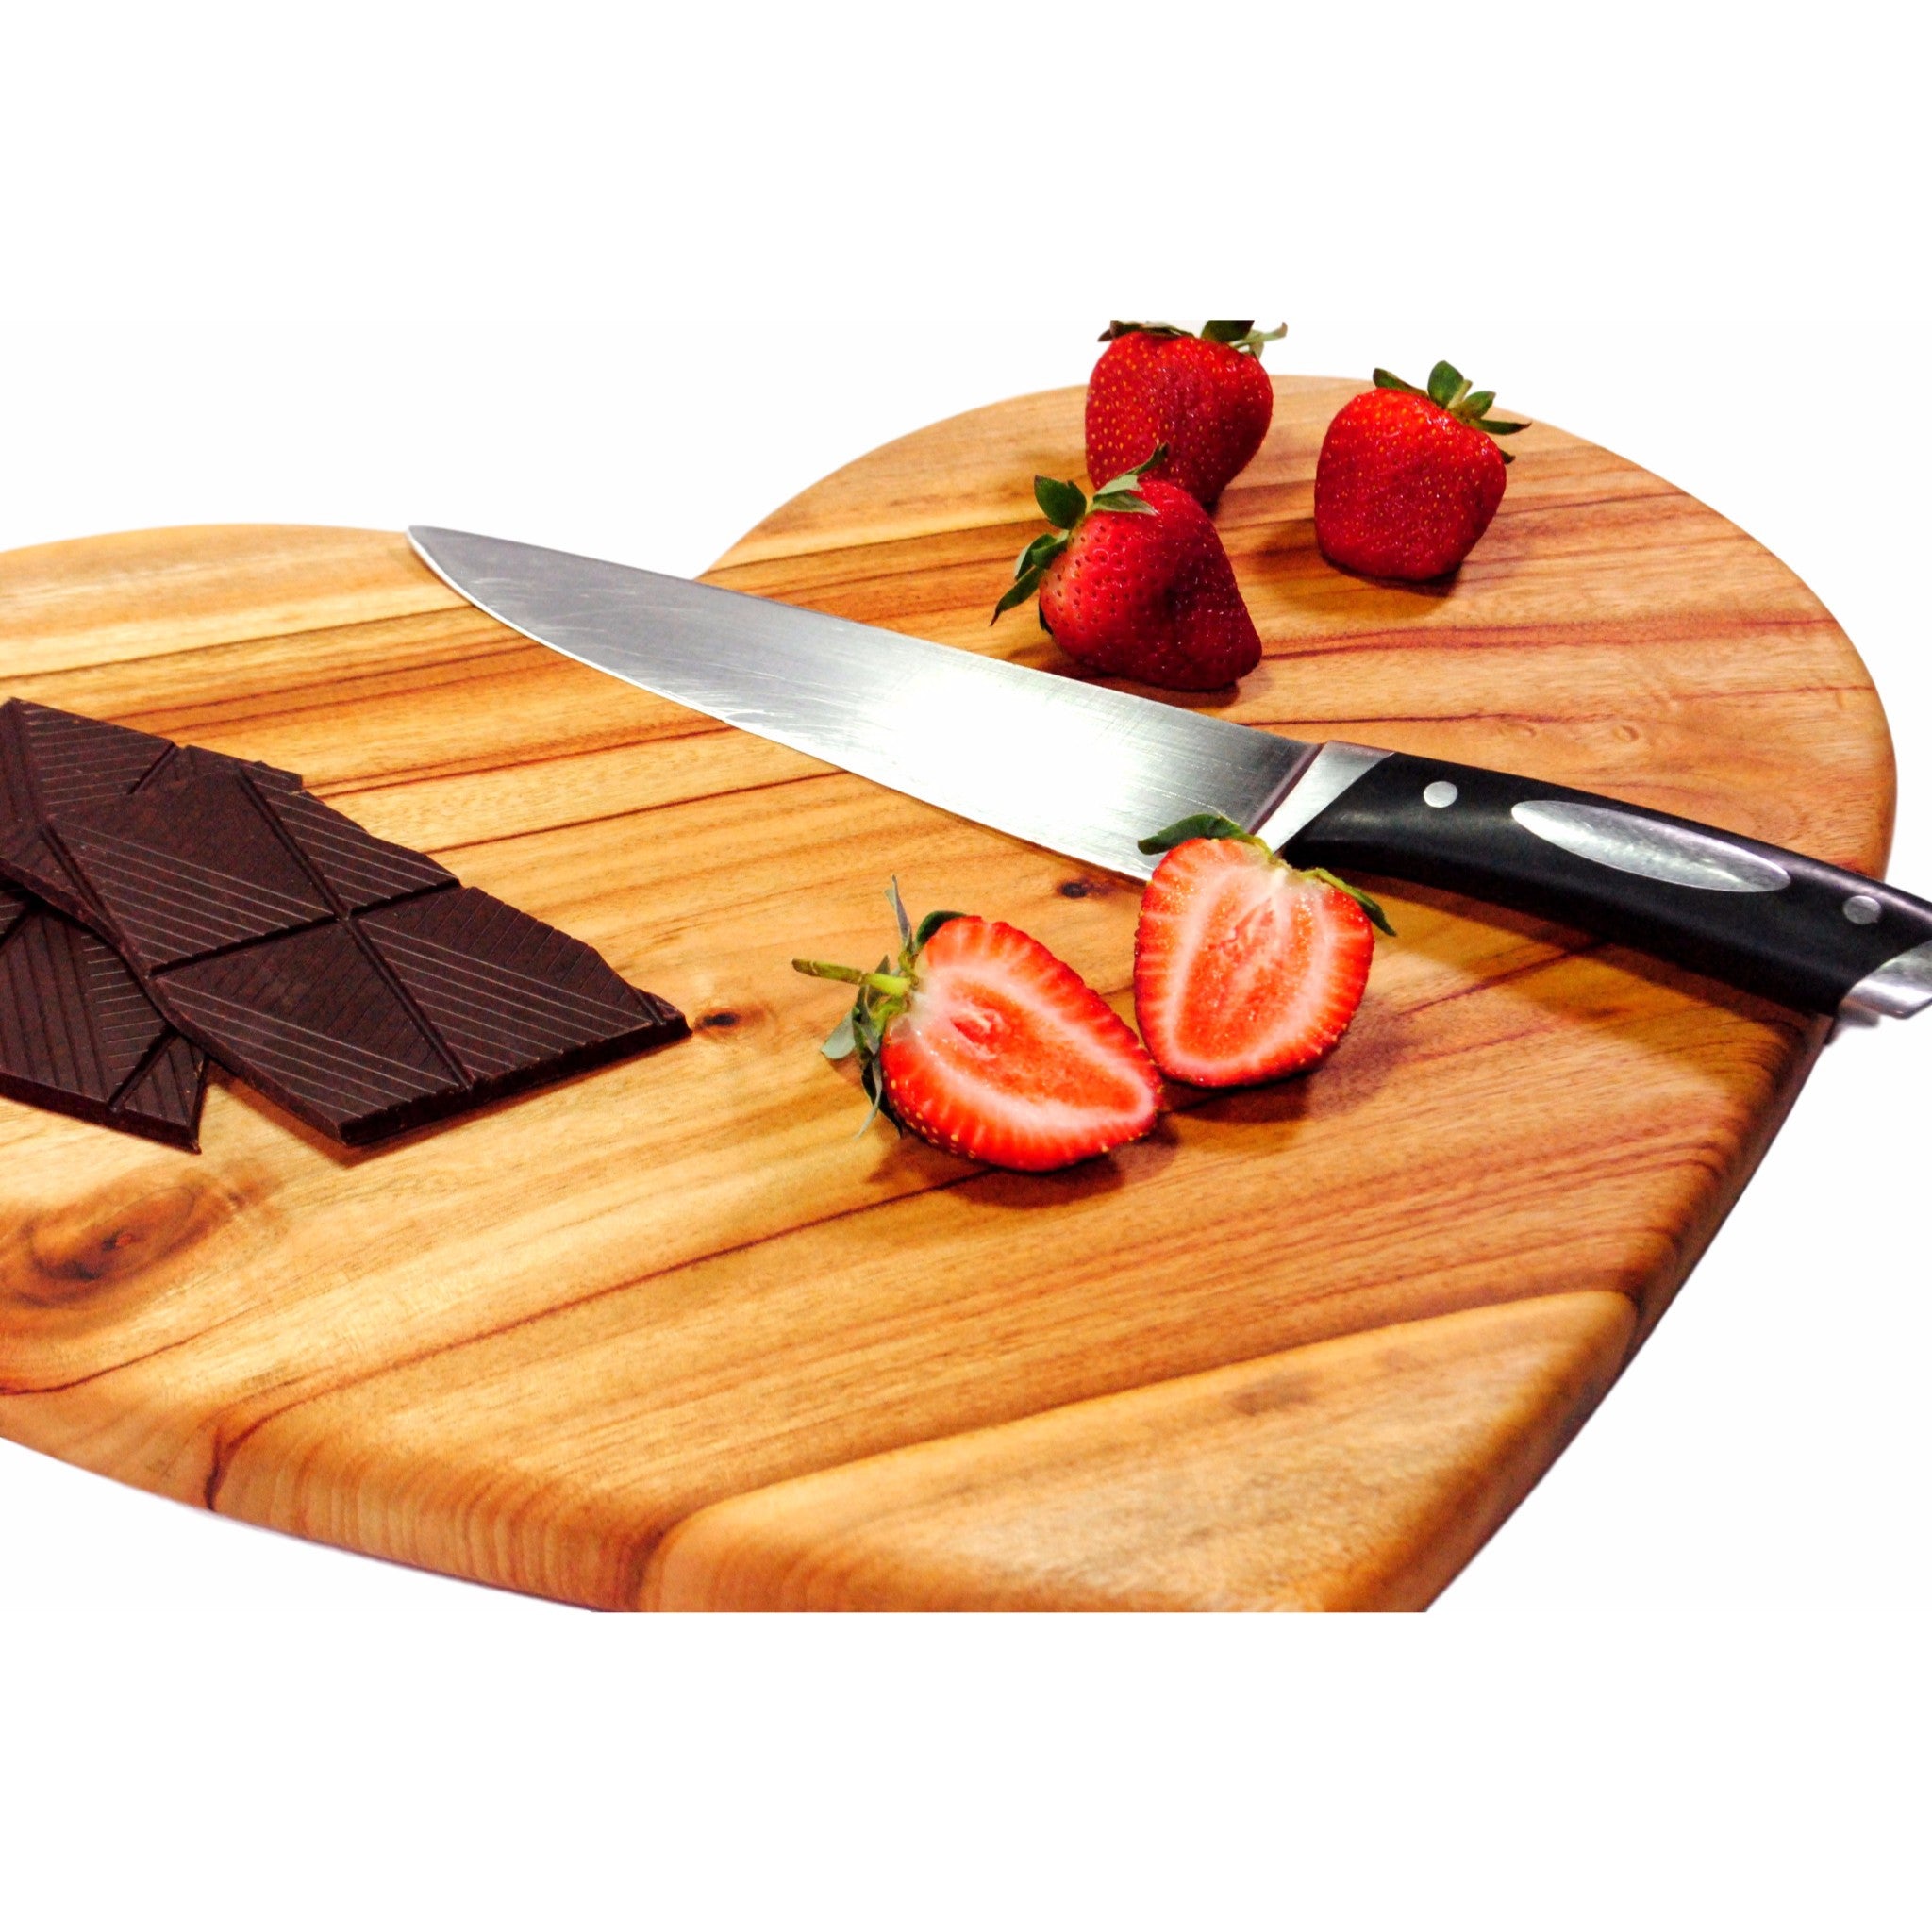 large heart cutting board wooden serving plate thin light restaurant cafe hospitality supplies